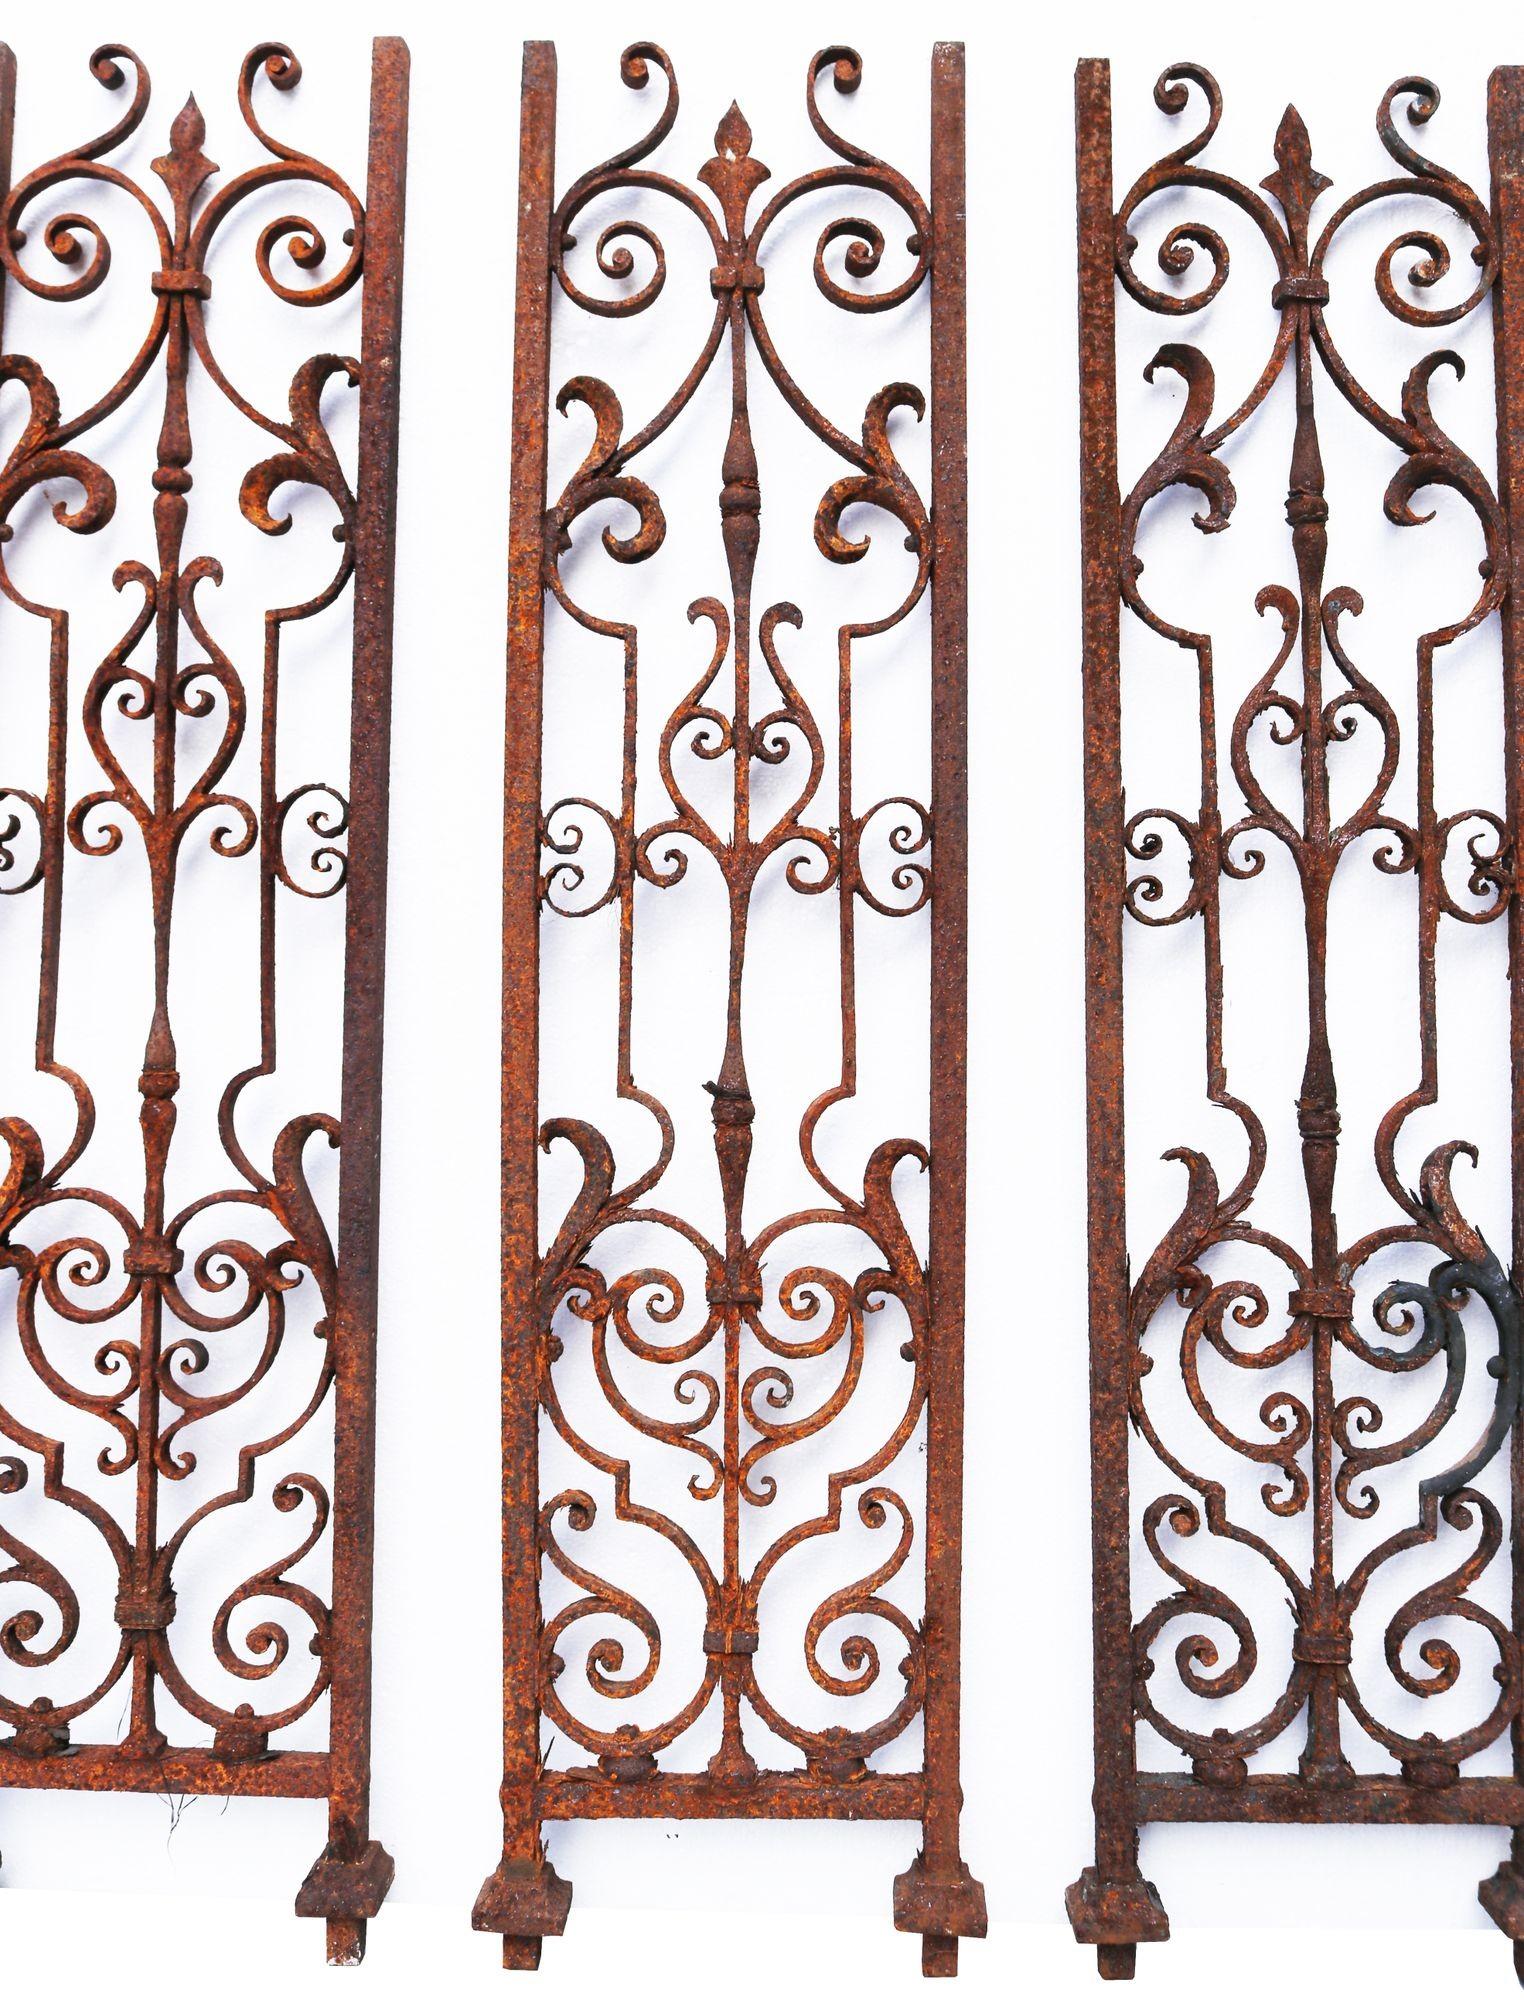 Set of Six Georgian Wrought Iron Balustrades In Good Condition For Sale In Wormelow, Herefordshire